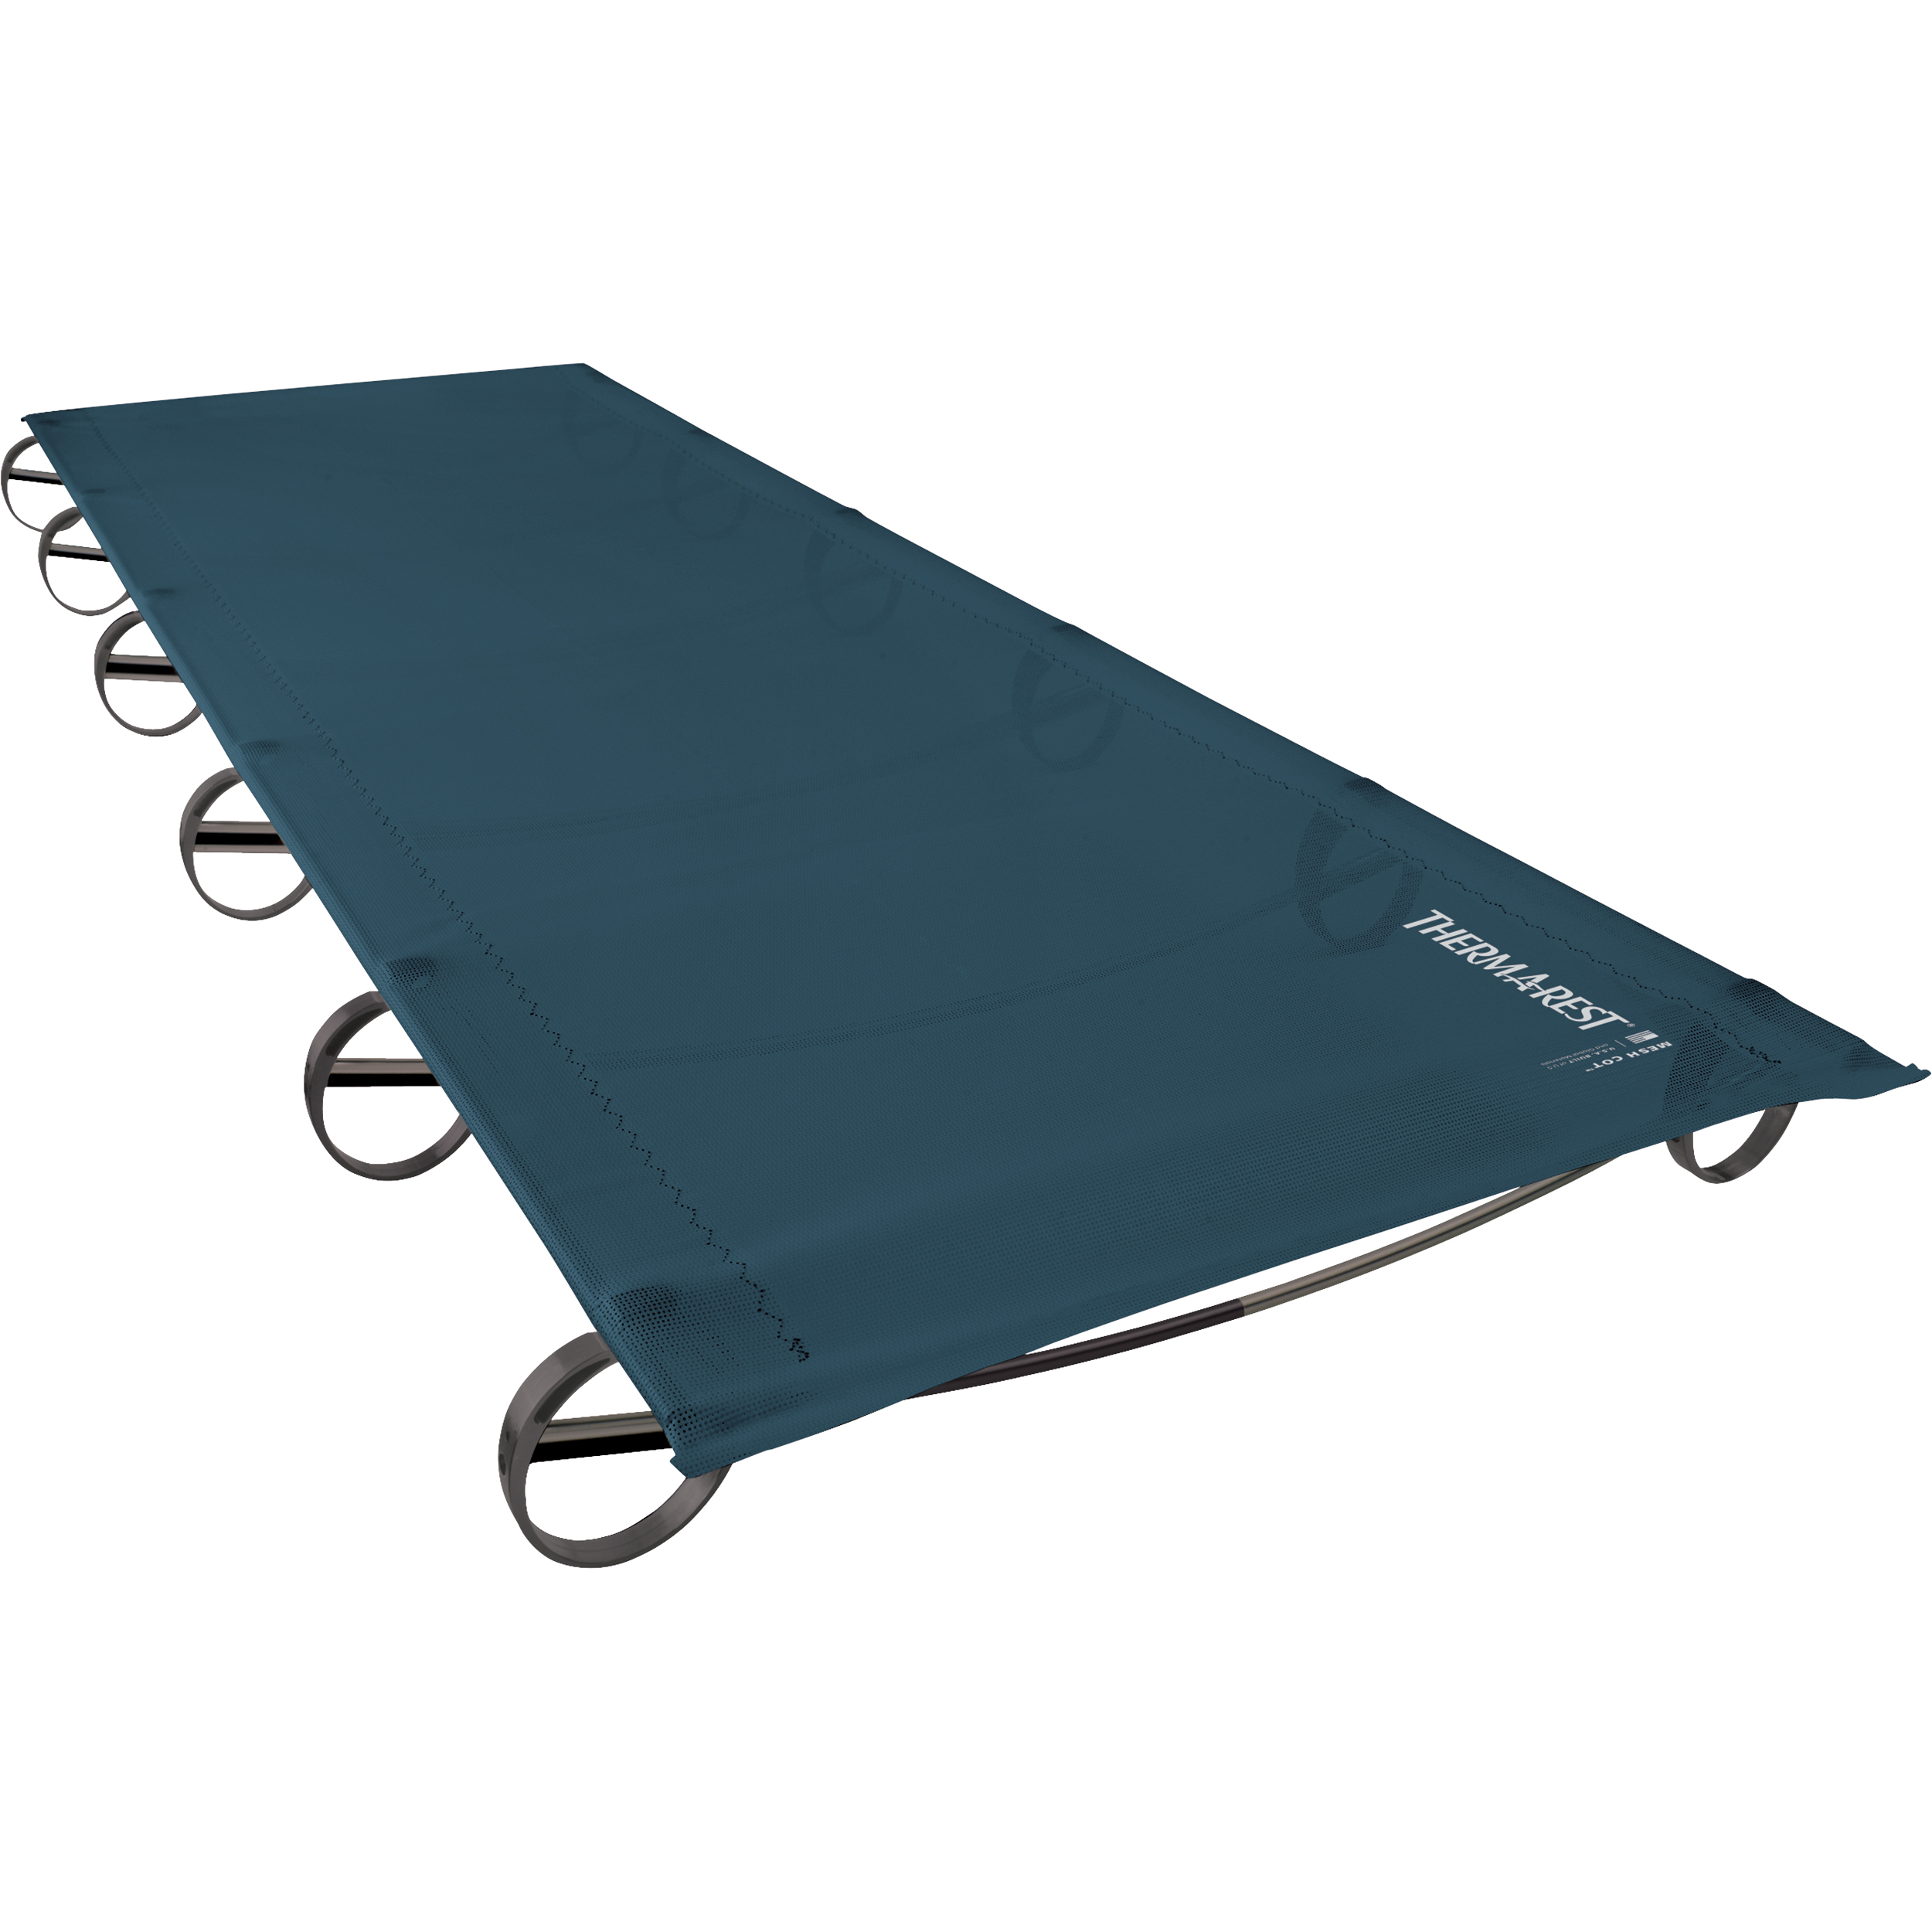 thermarest camping cot